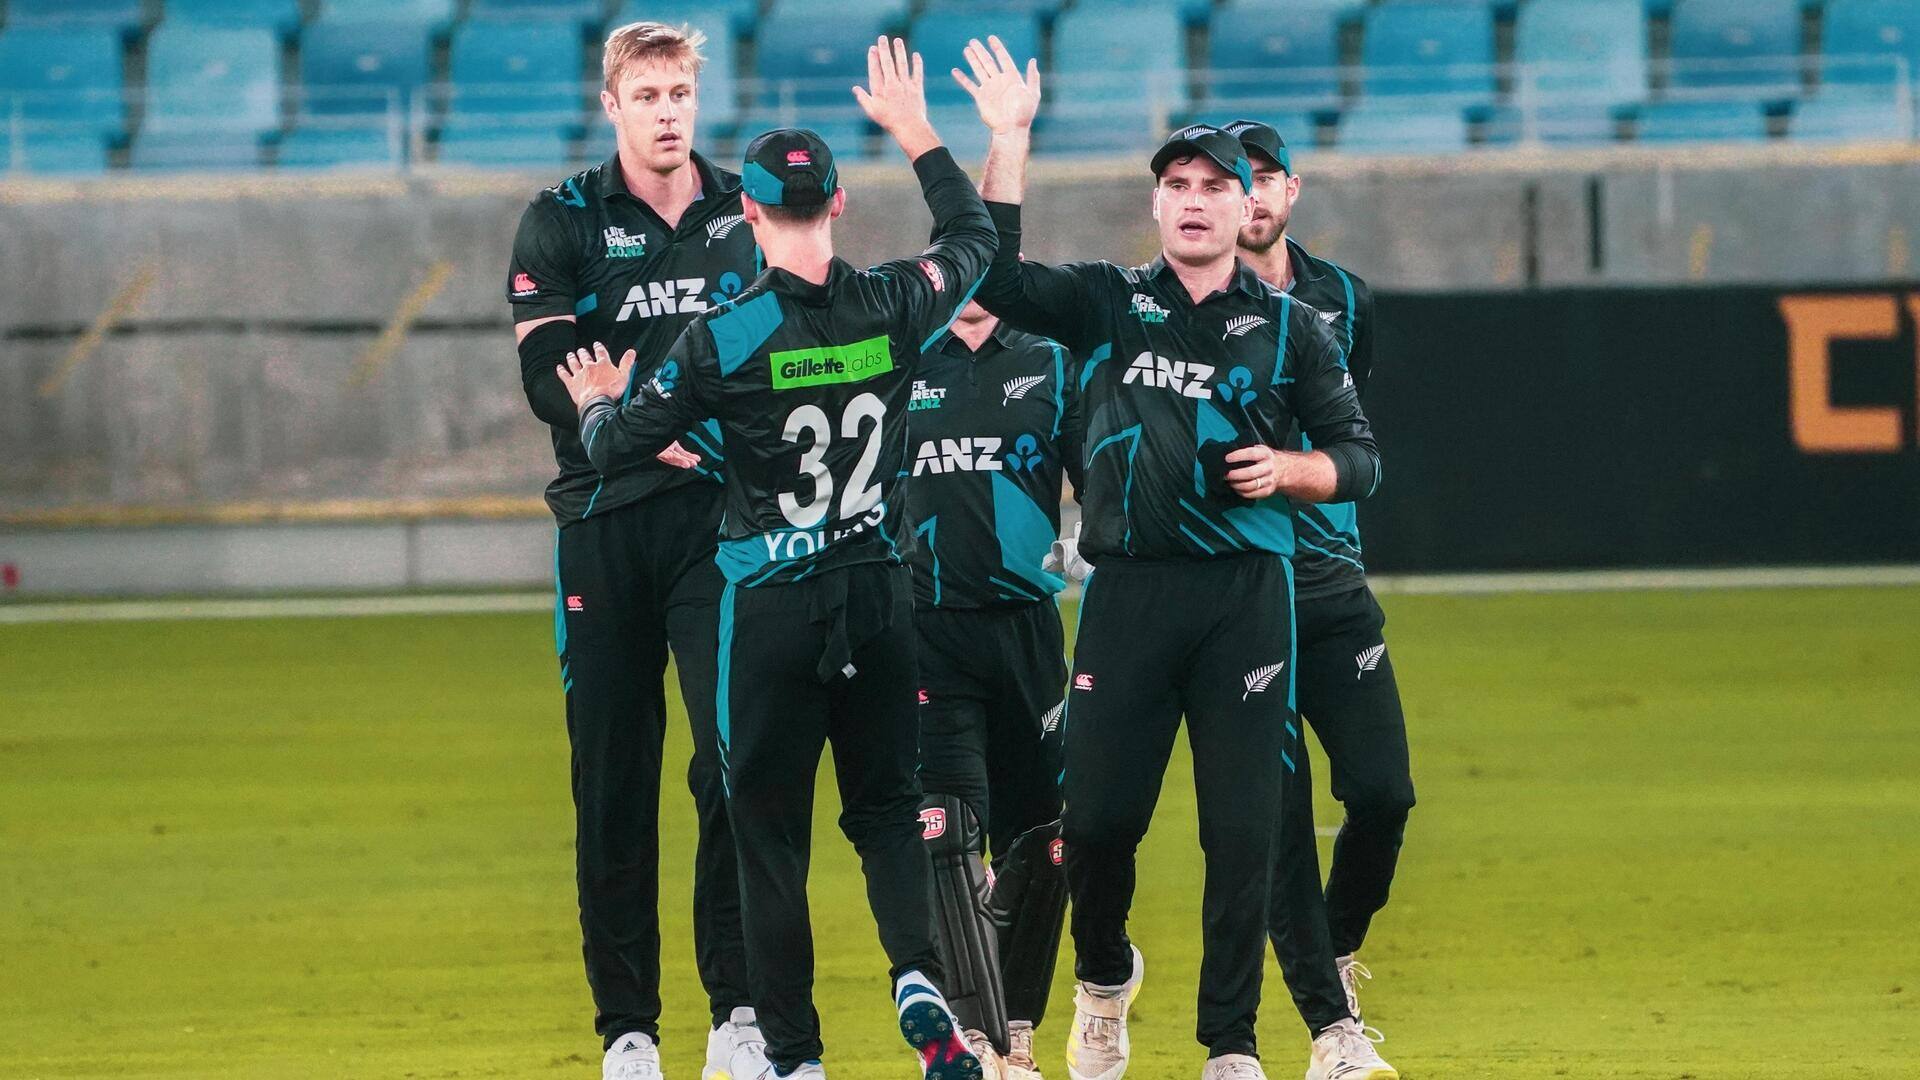 NZ outclass UAE in 3rd T20I, wrap-up series: Key stats